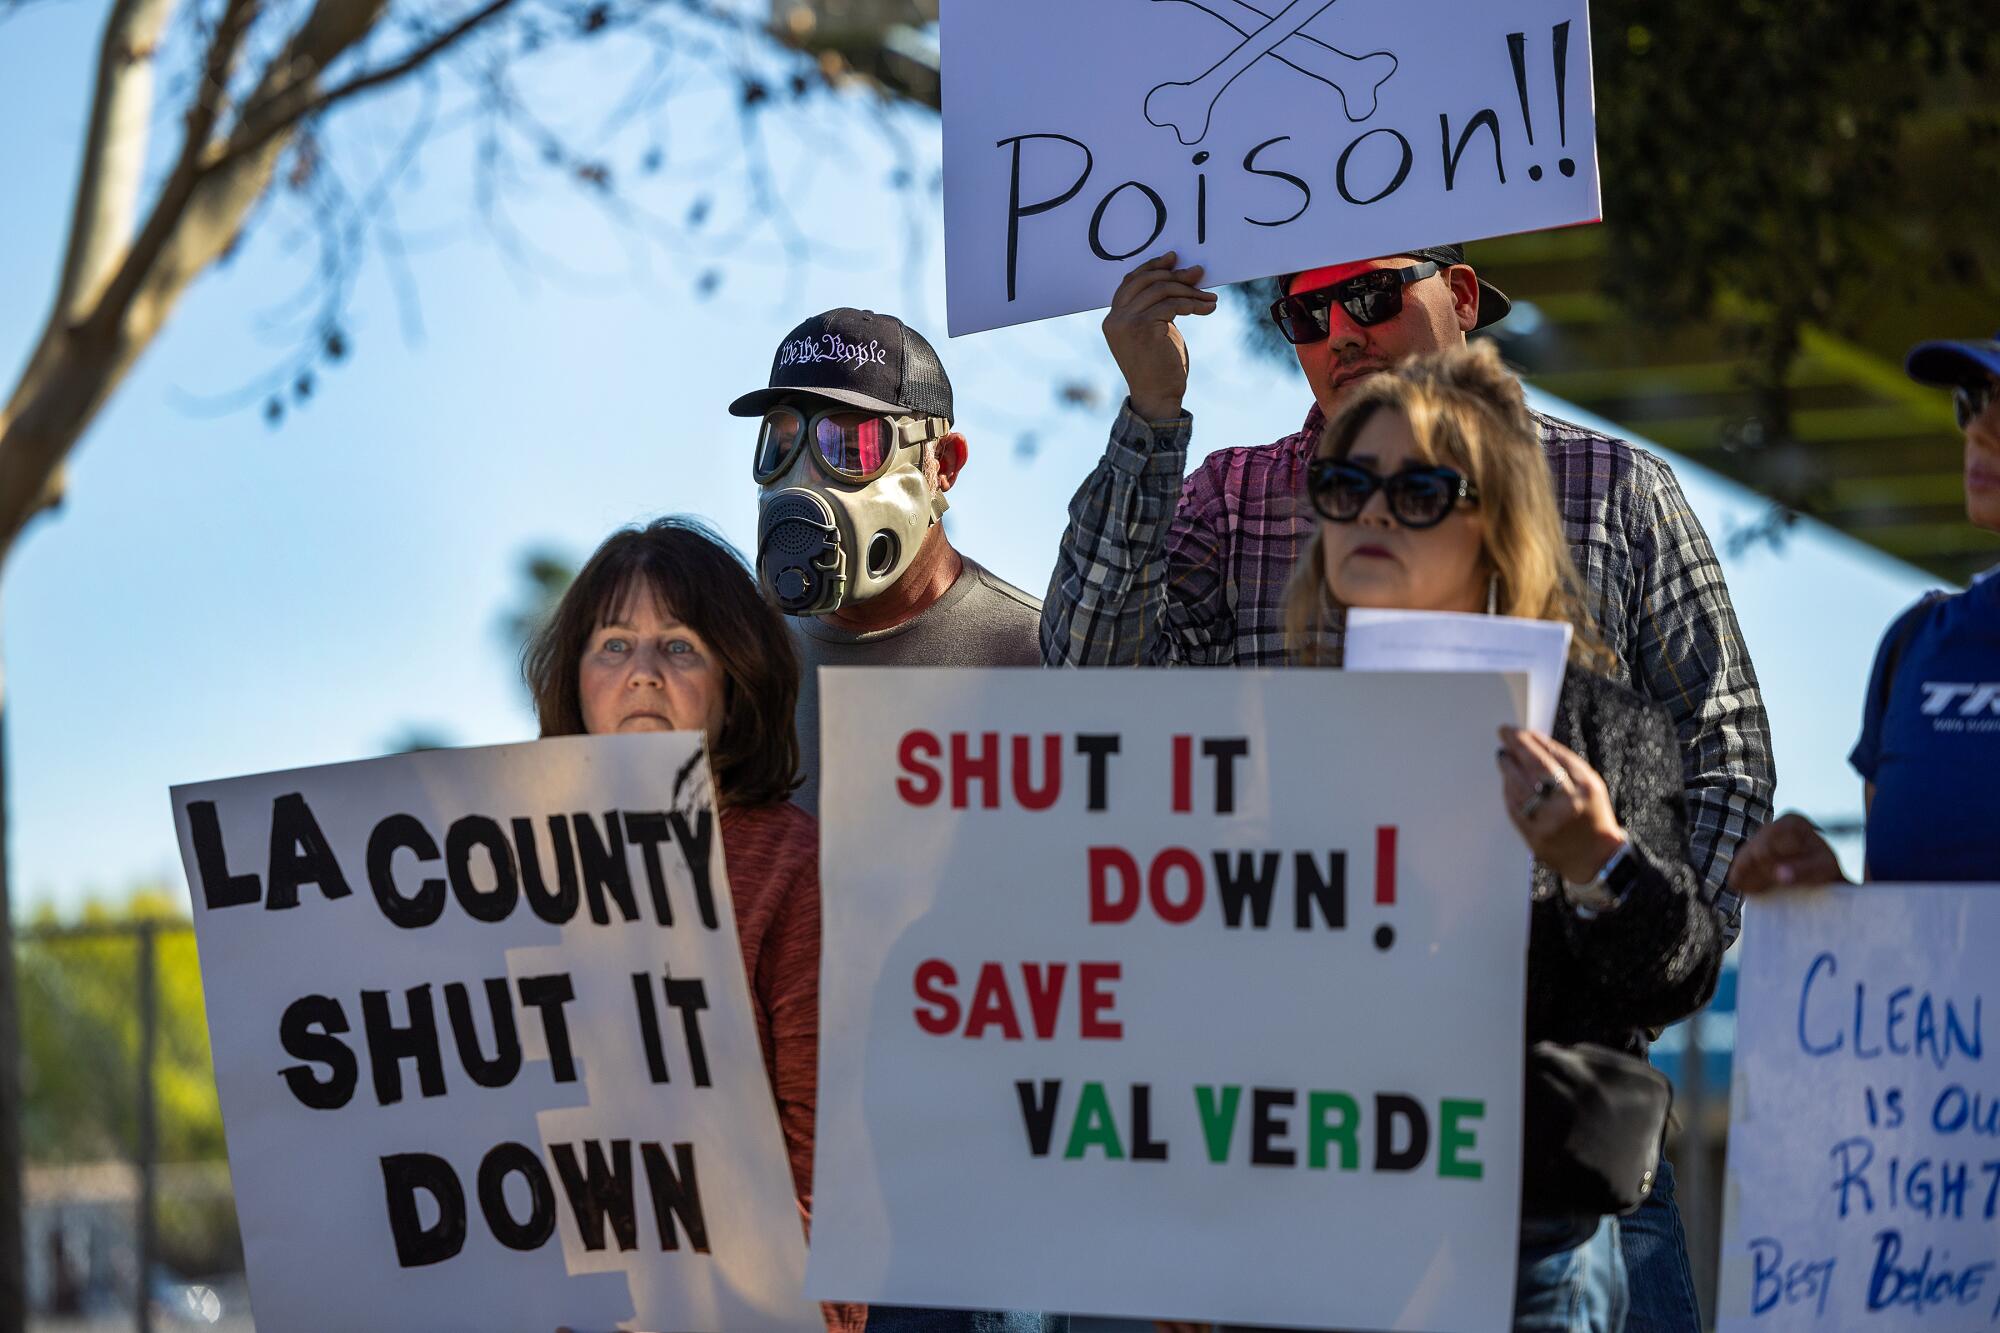 Protesters, one wearing a gas mask, hold signs that read "Poison!!" and "Shut it down! Save Val Verde."